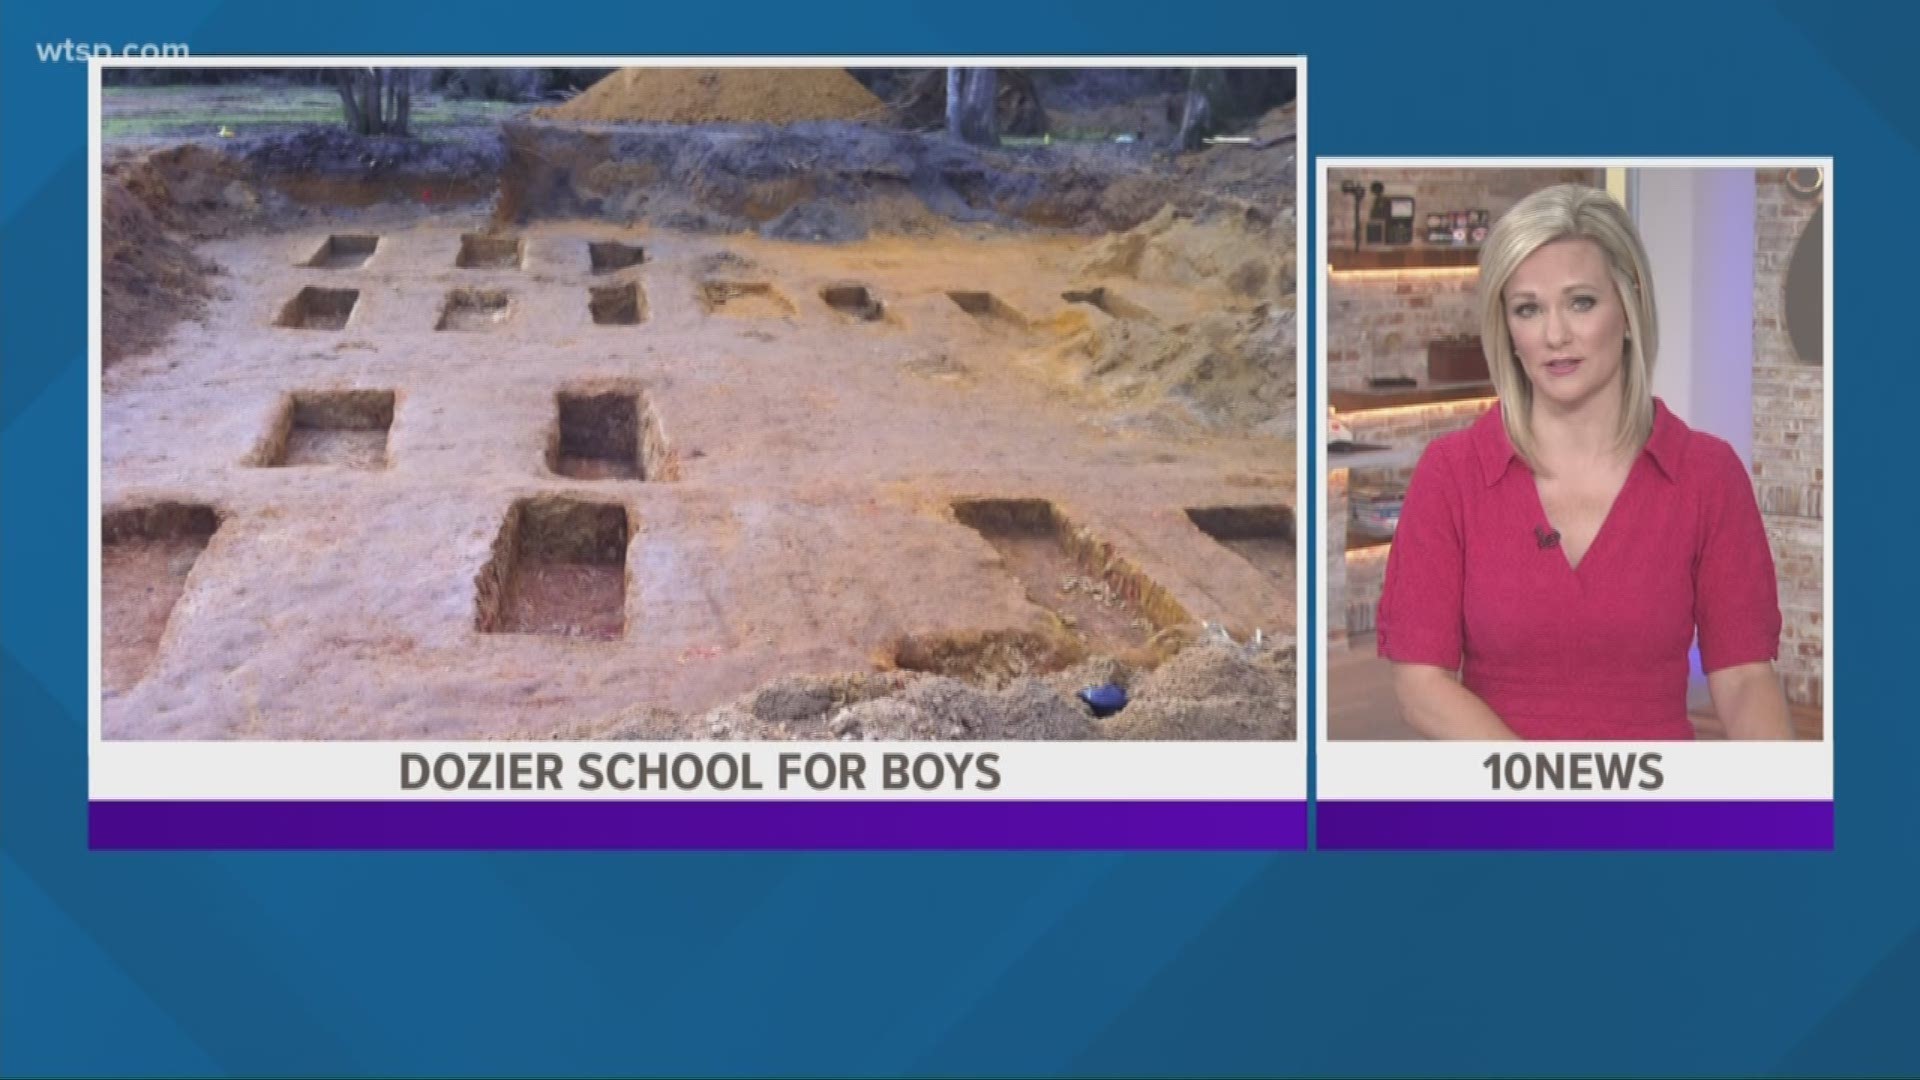 The first phase of an investigation of 27 "anomalies" near the defunct Dozier School for Boys revealed no human remains. The Florida Department of State said the USF research team just concluded the first phase of the investigation, which found mostly evidence of tree roots from a previously removed pine tree forest.